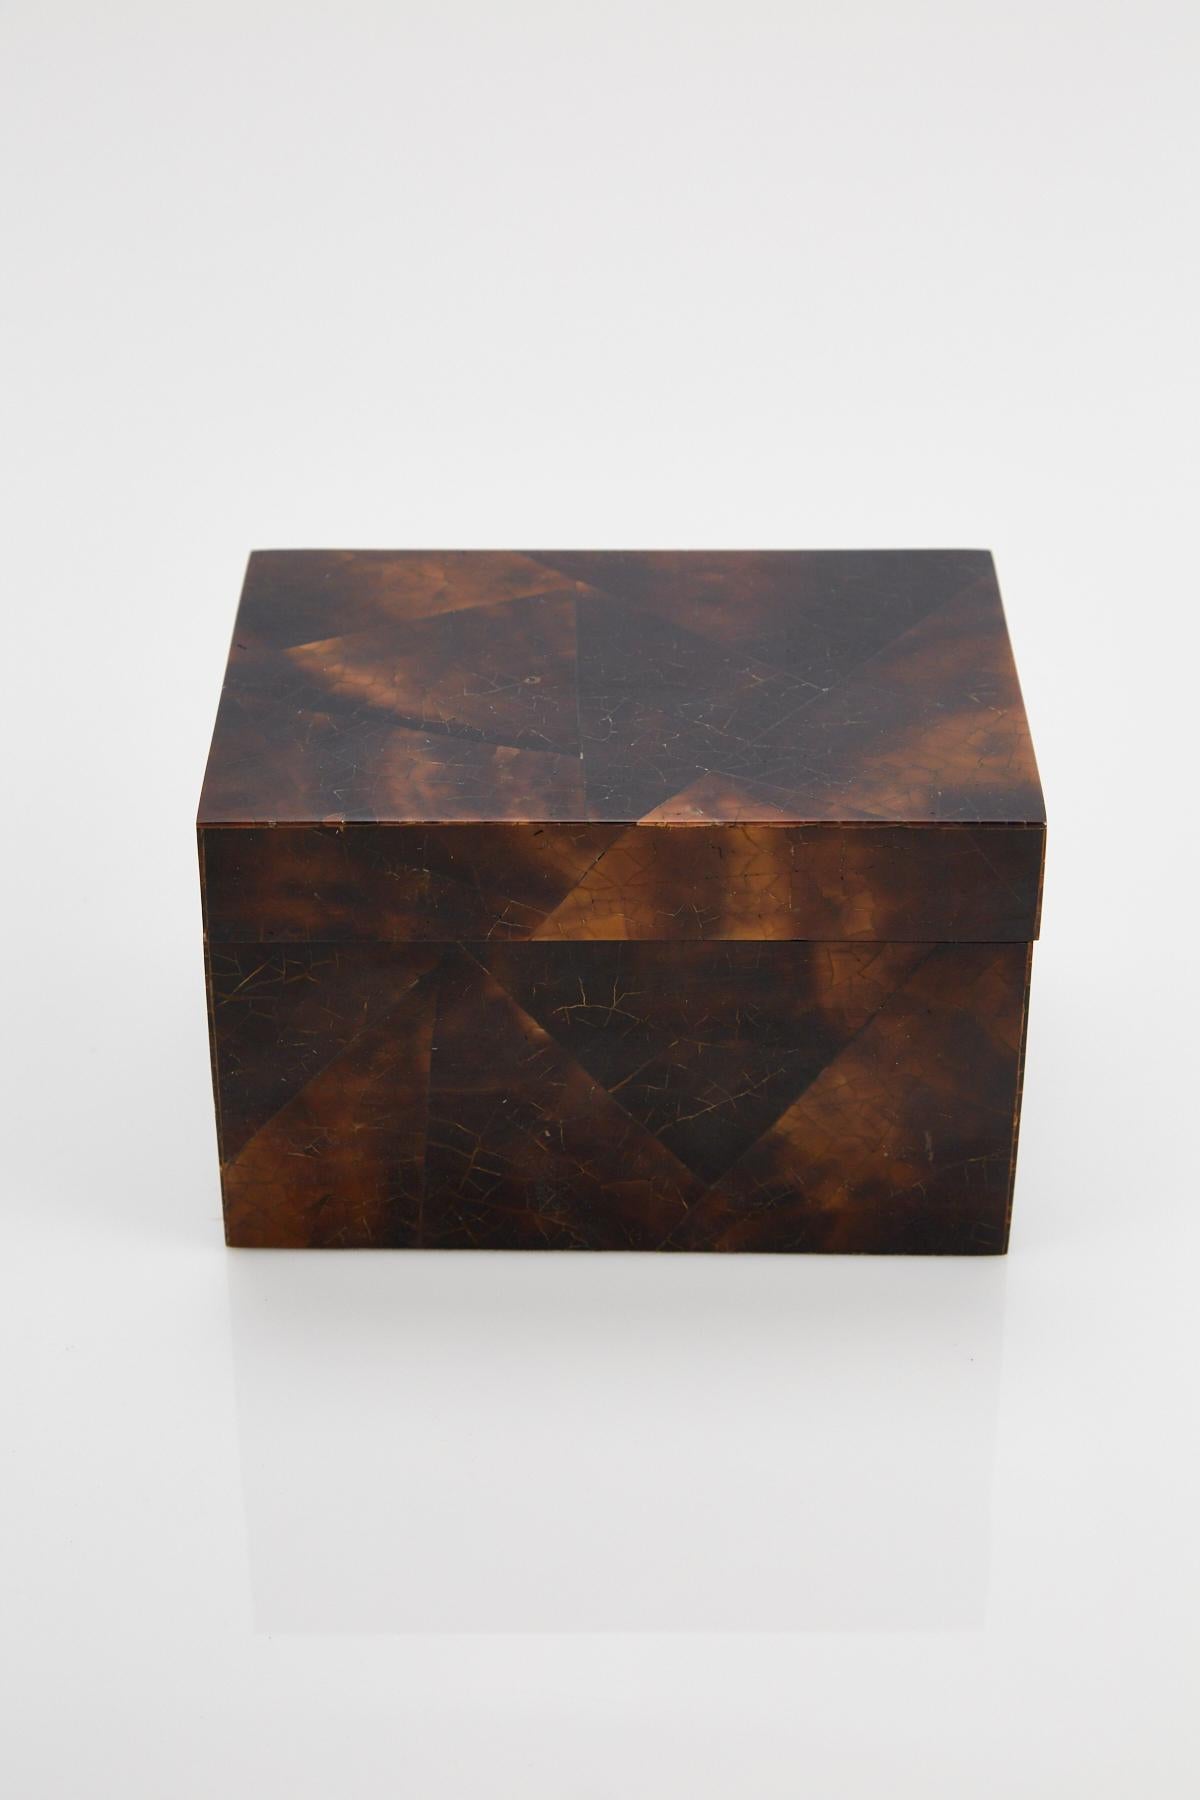 Medium sized lidded decorative box executed in brick inlaid tessellated young pen shell. Interior lined with wood.